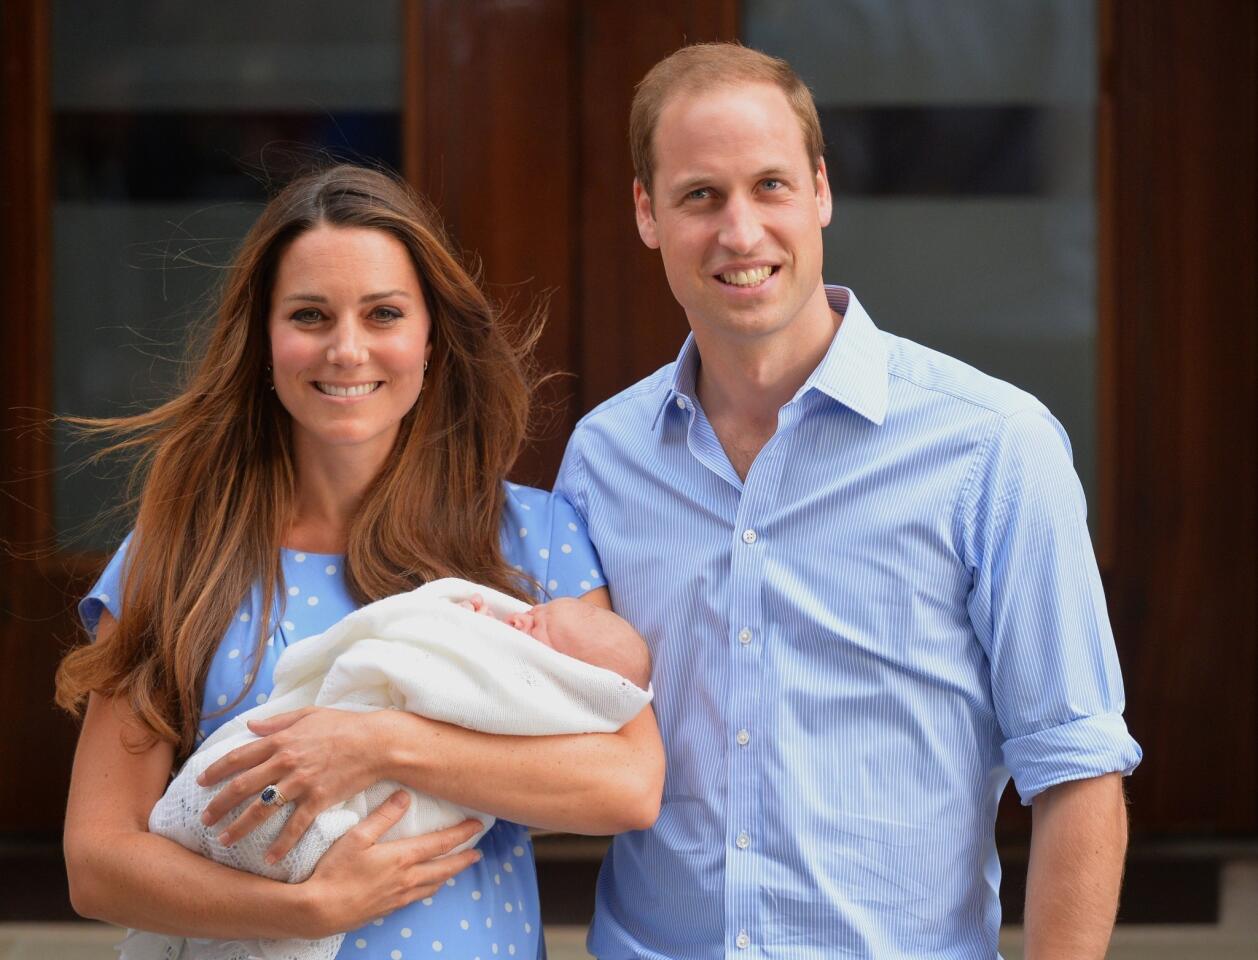 The couple welcomed their son, Prince George, the third in line to the British throne, on July 22, 2013.